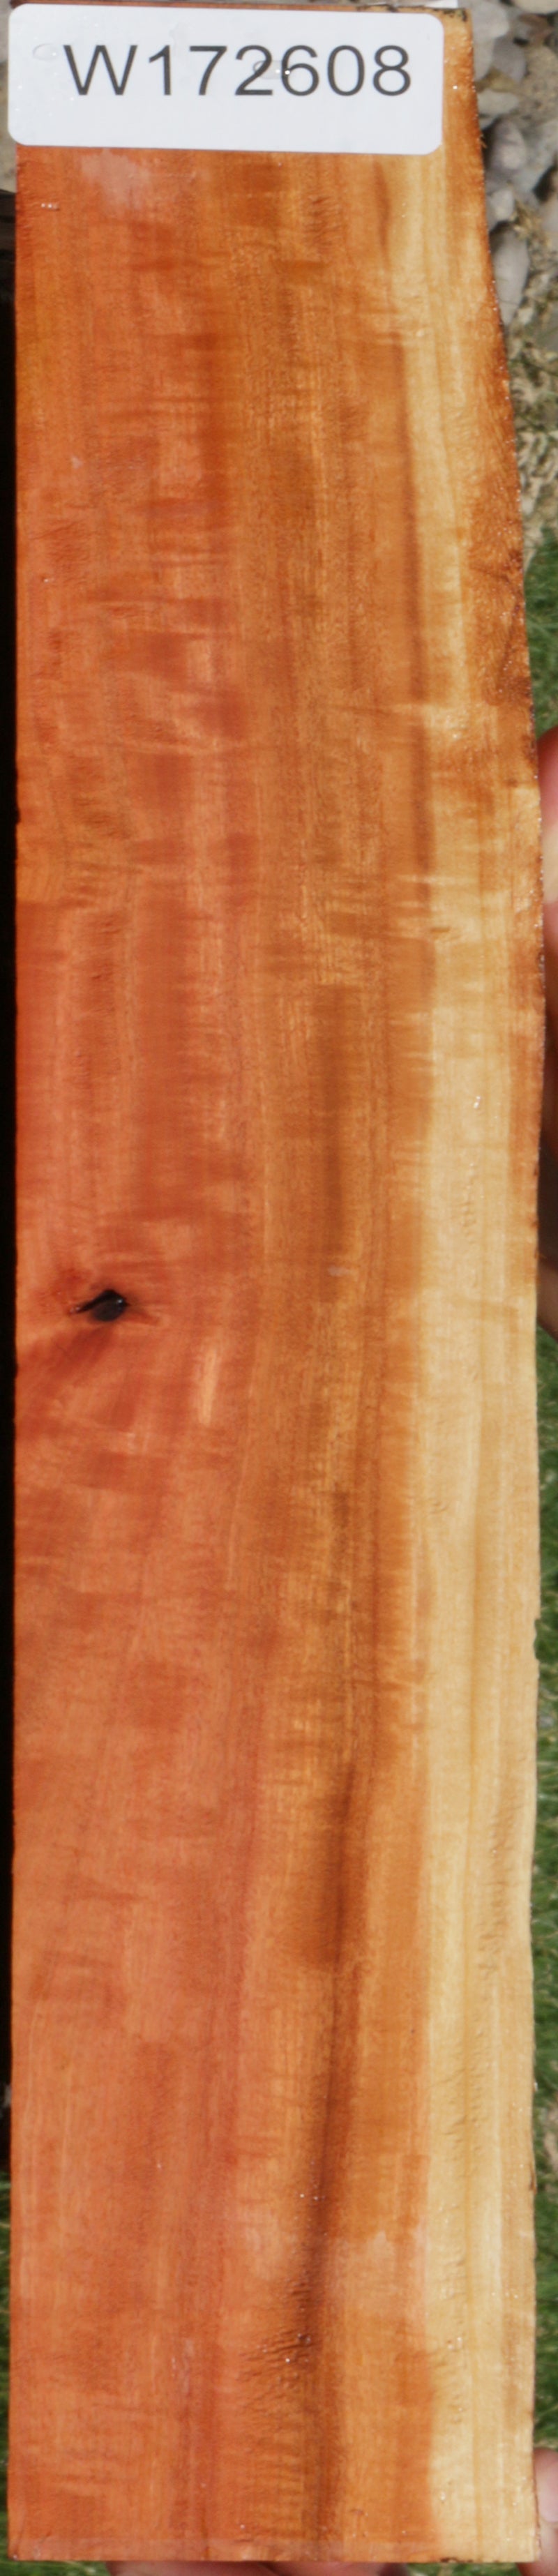 Extra Fancy Pink Ivory Live Edge Lumber